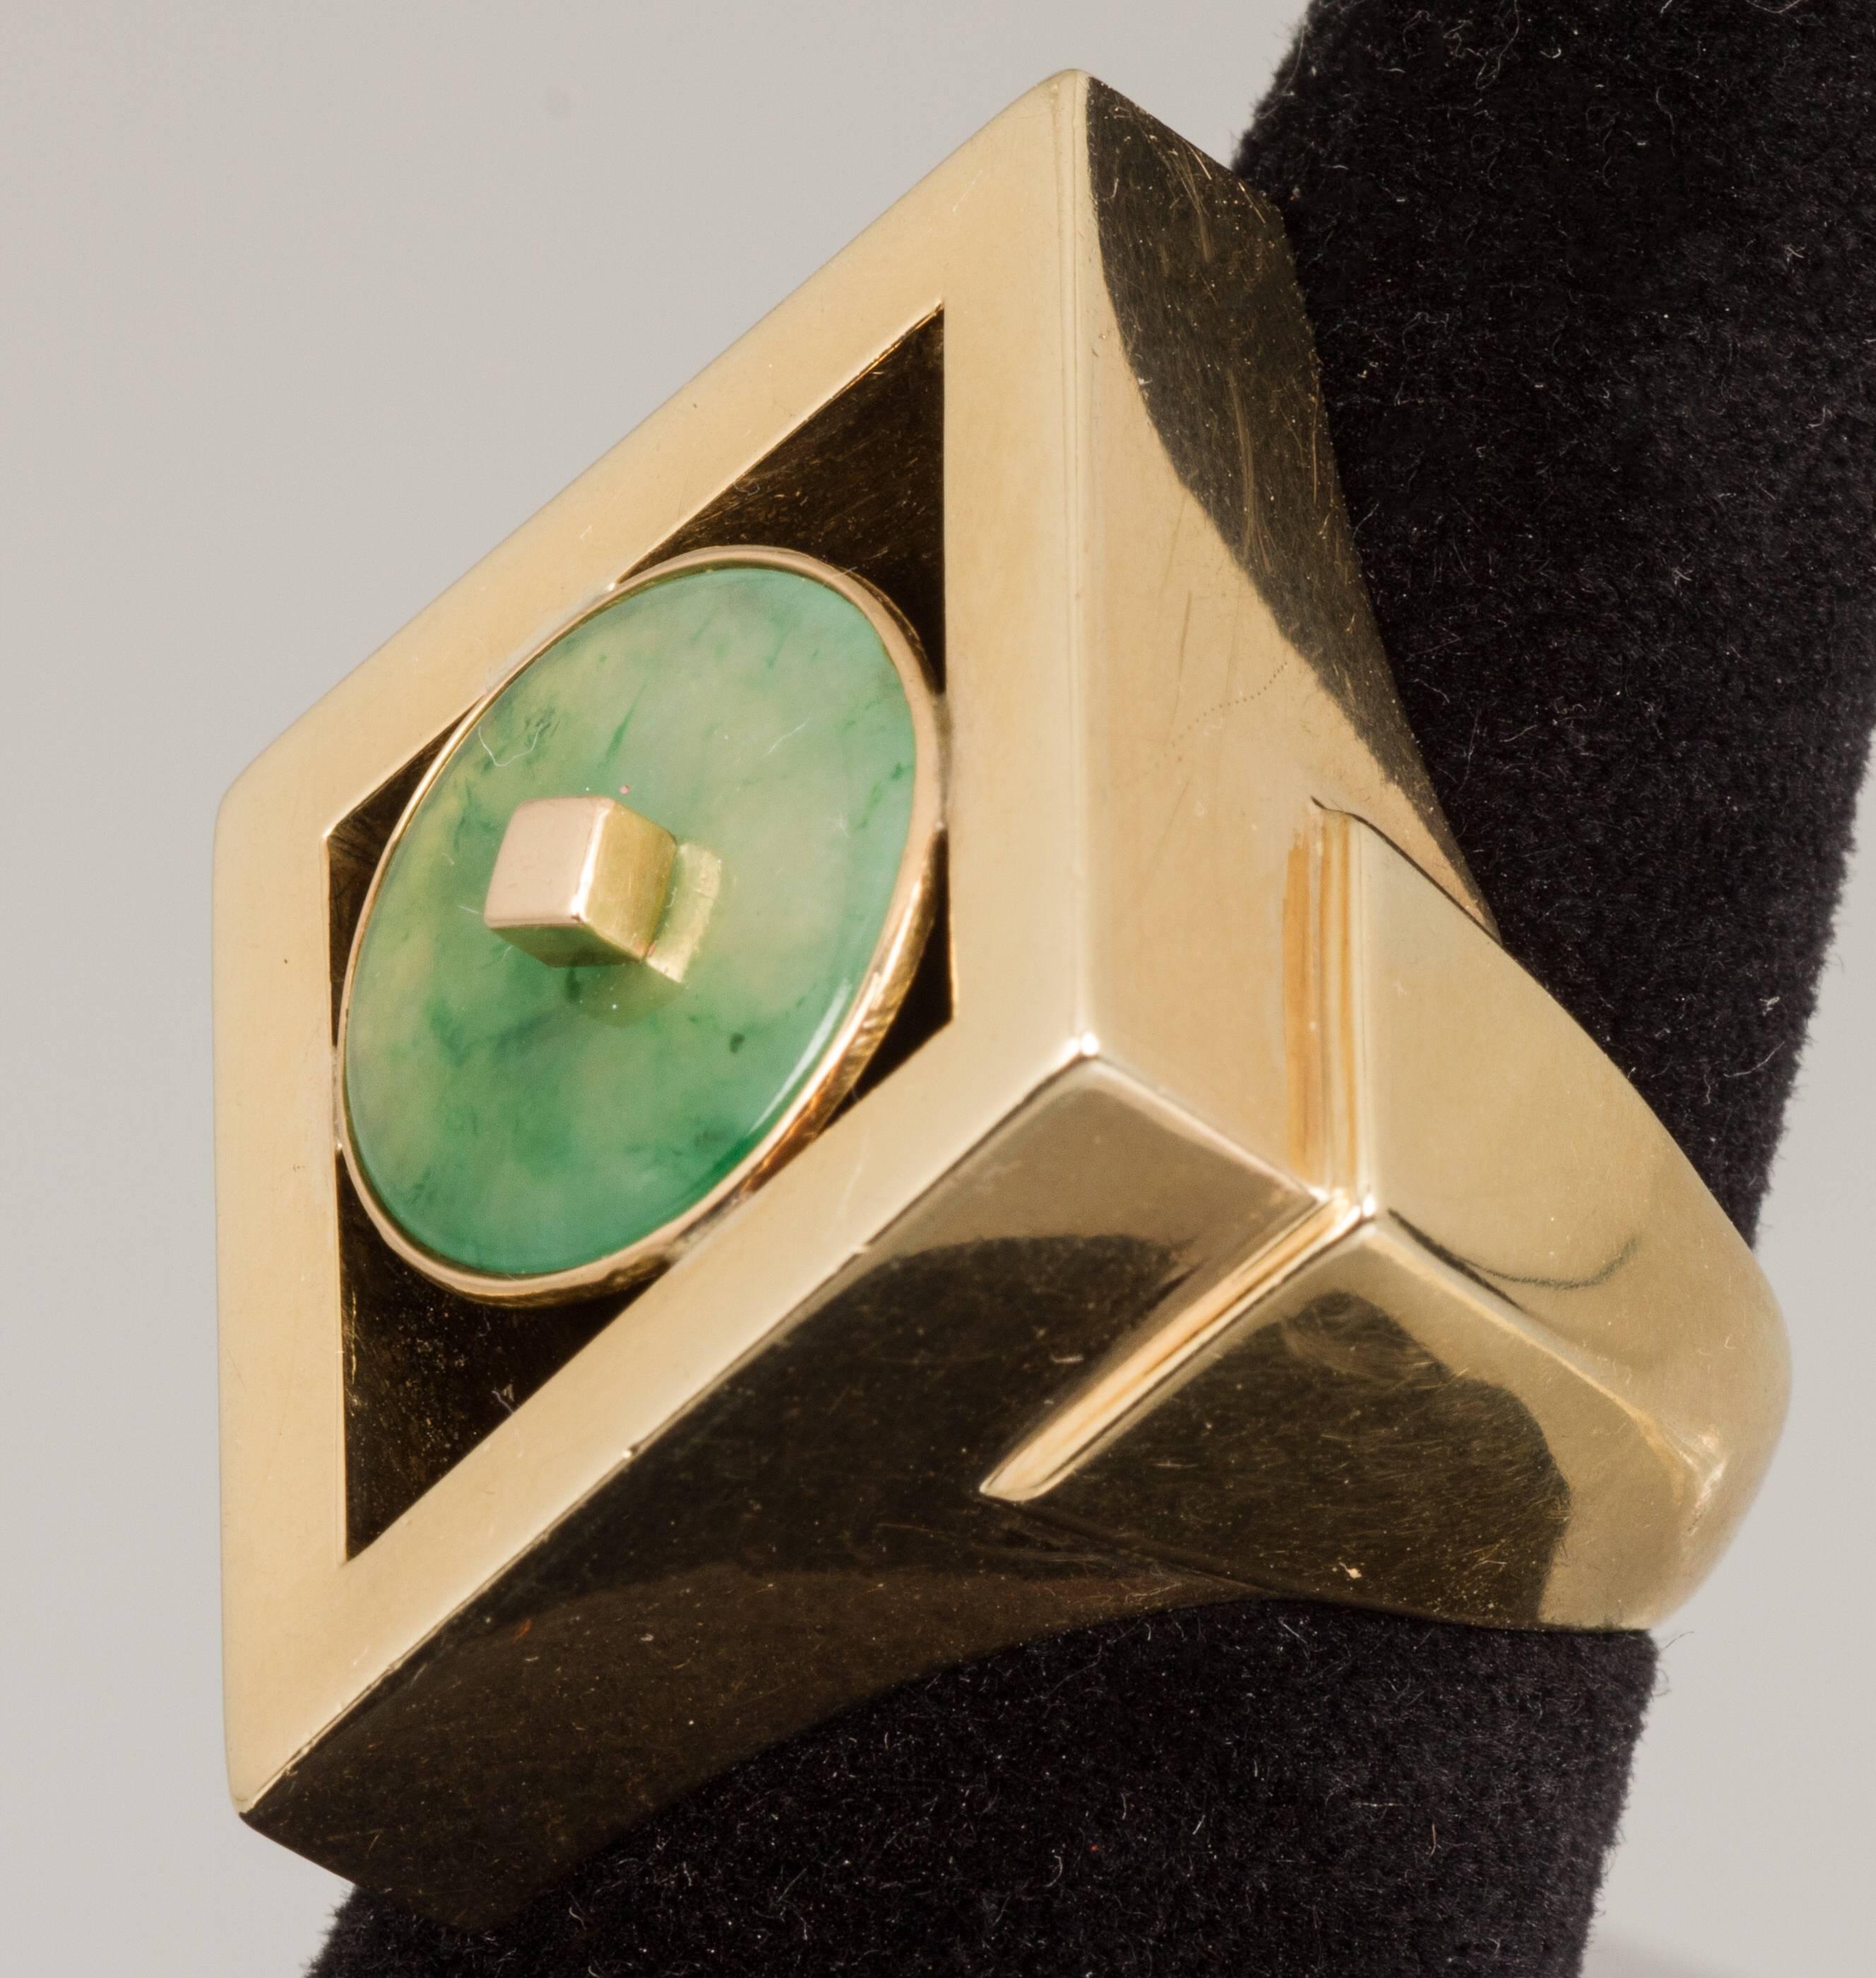 This is a bold modernist ring in a diamond form. The jade is bezel set.

The ring is a size 9.